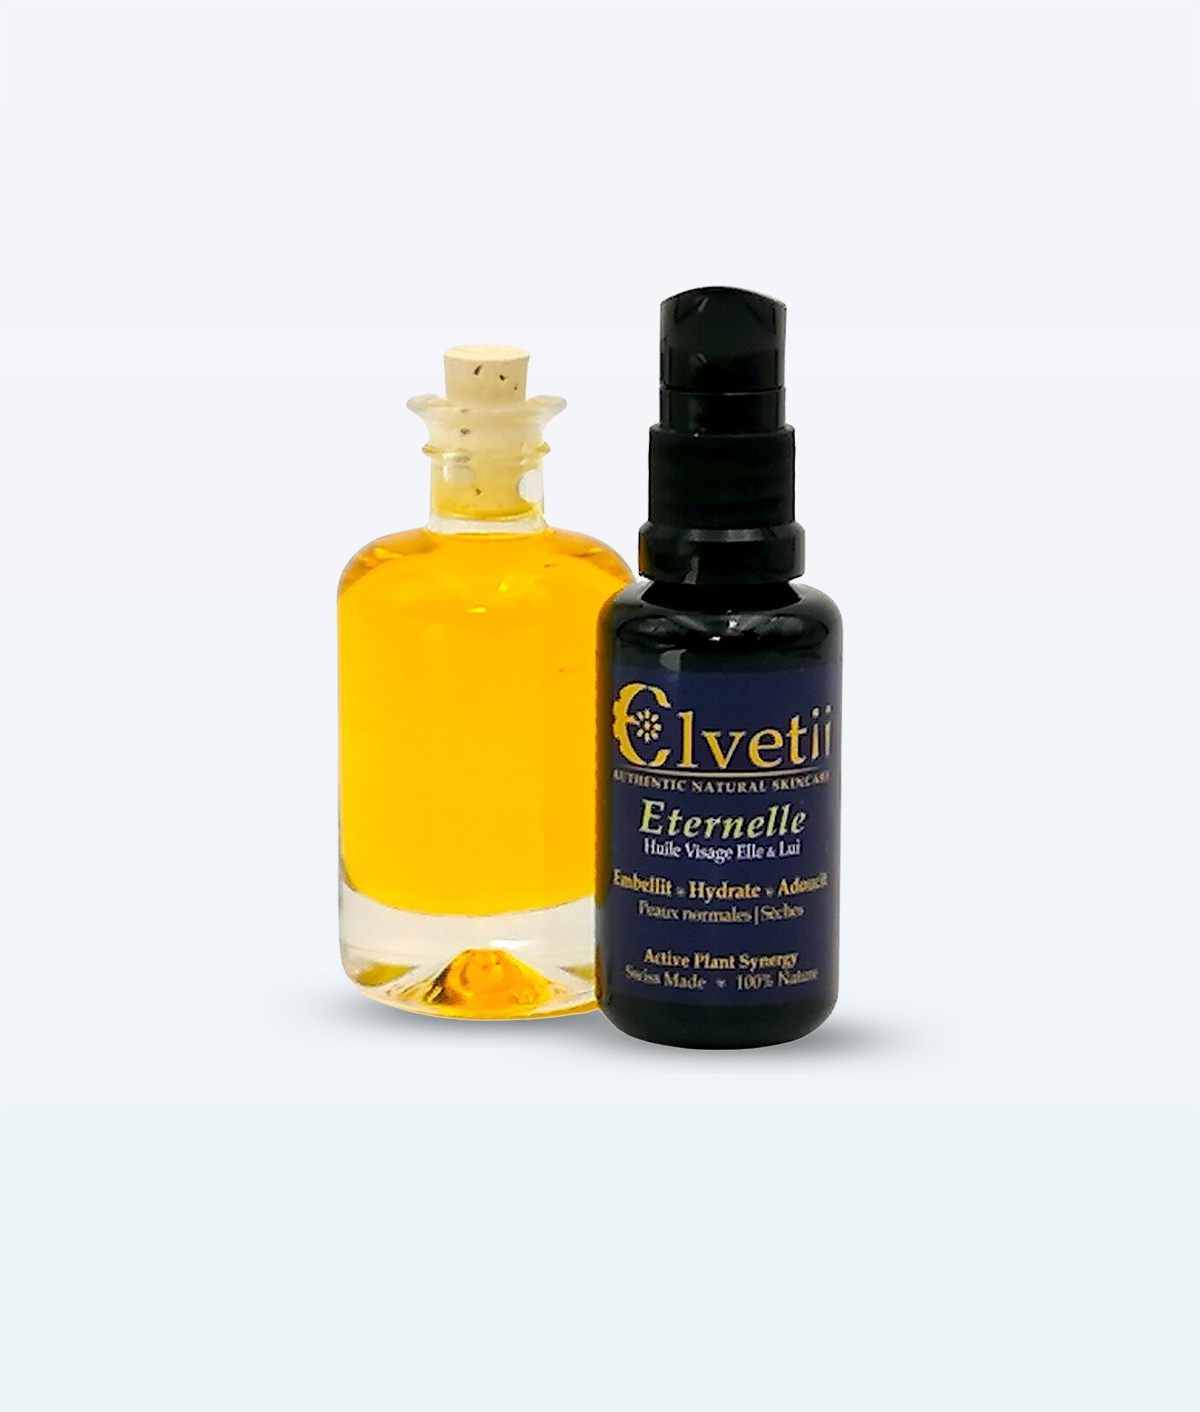 Eternelle Facial Serum - for Normal to Dry Skin Types 30 ml, Elvetii Eternelle Facial Serum - Swiss Made Direct - eternelle facial serum for normal to dry skin types